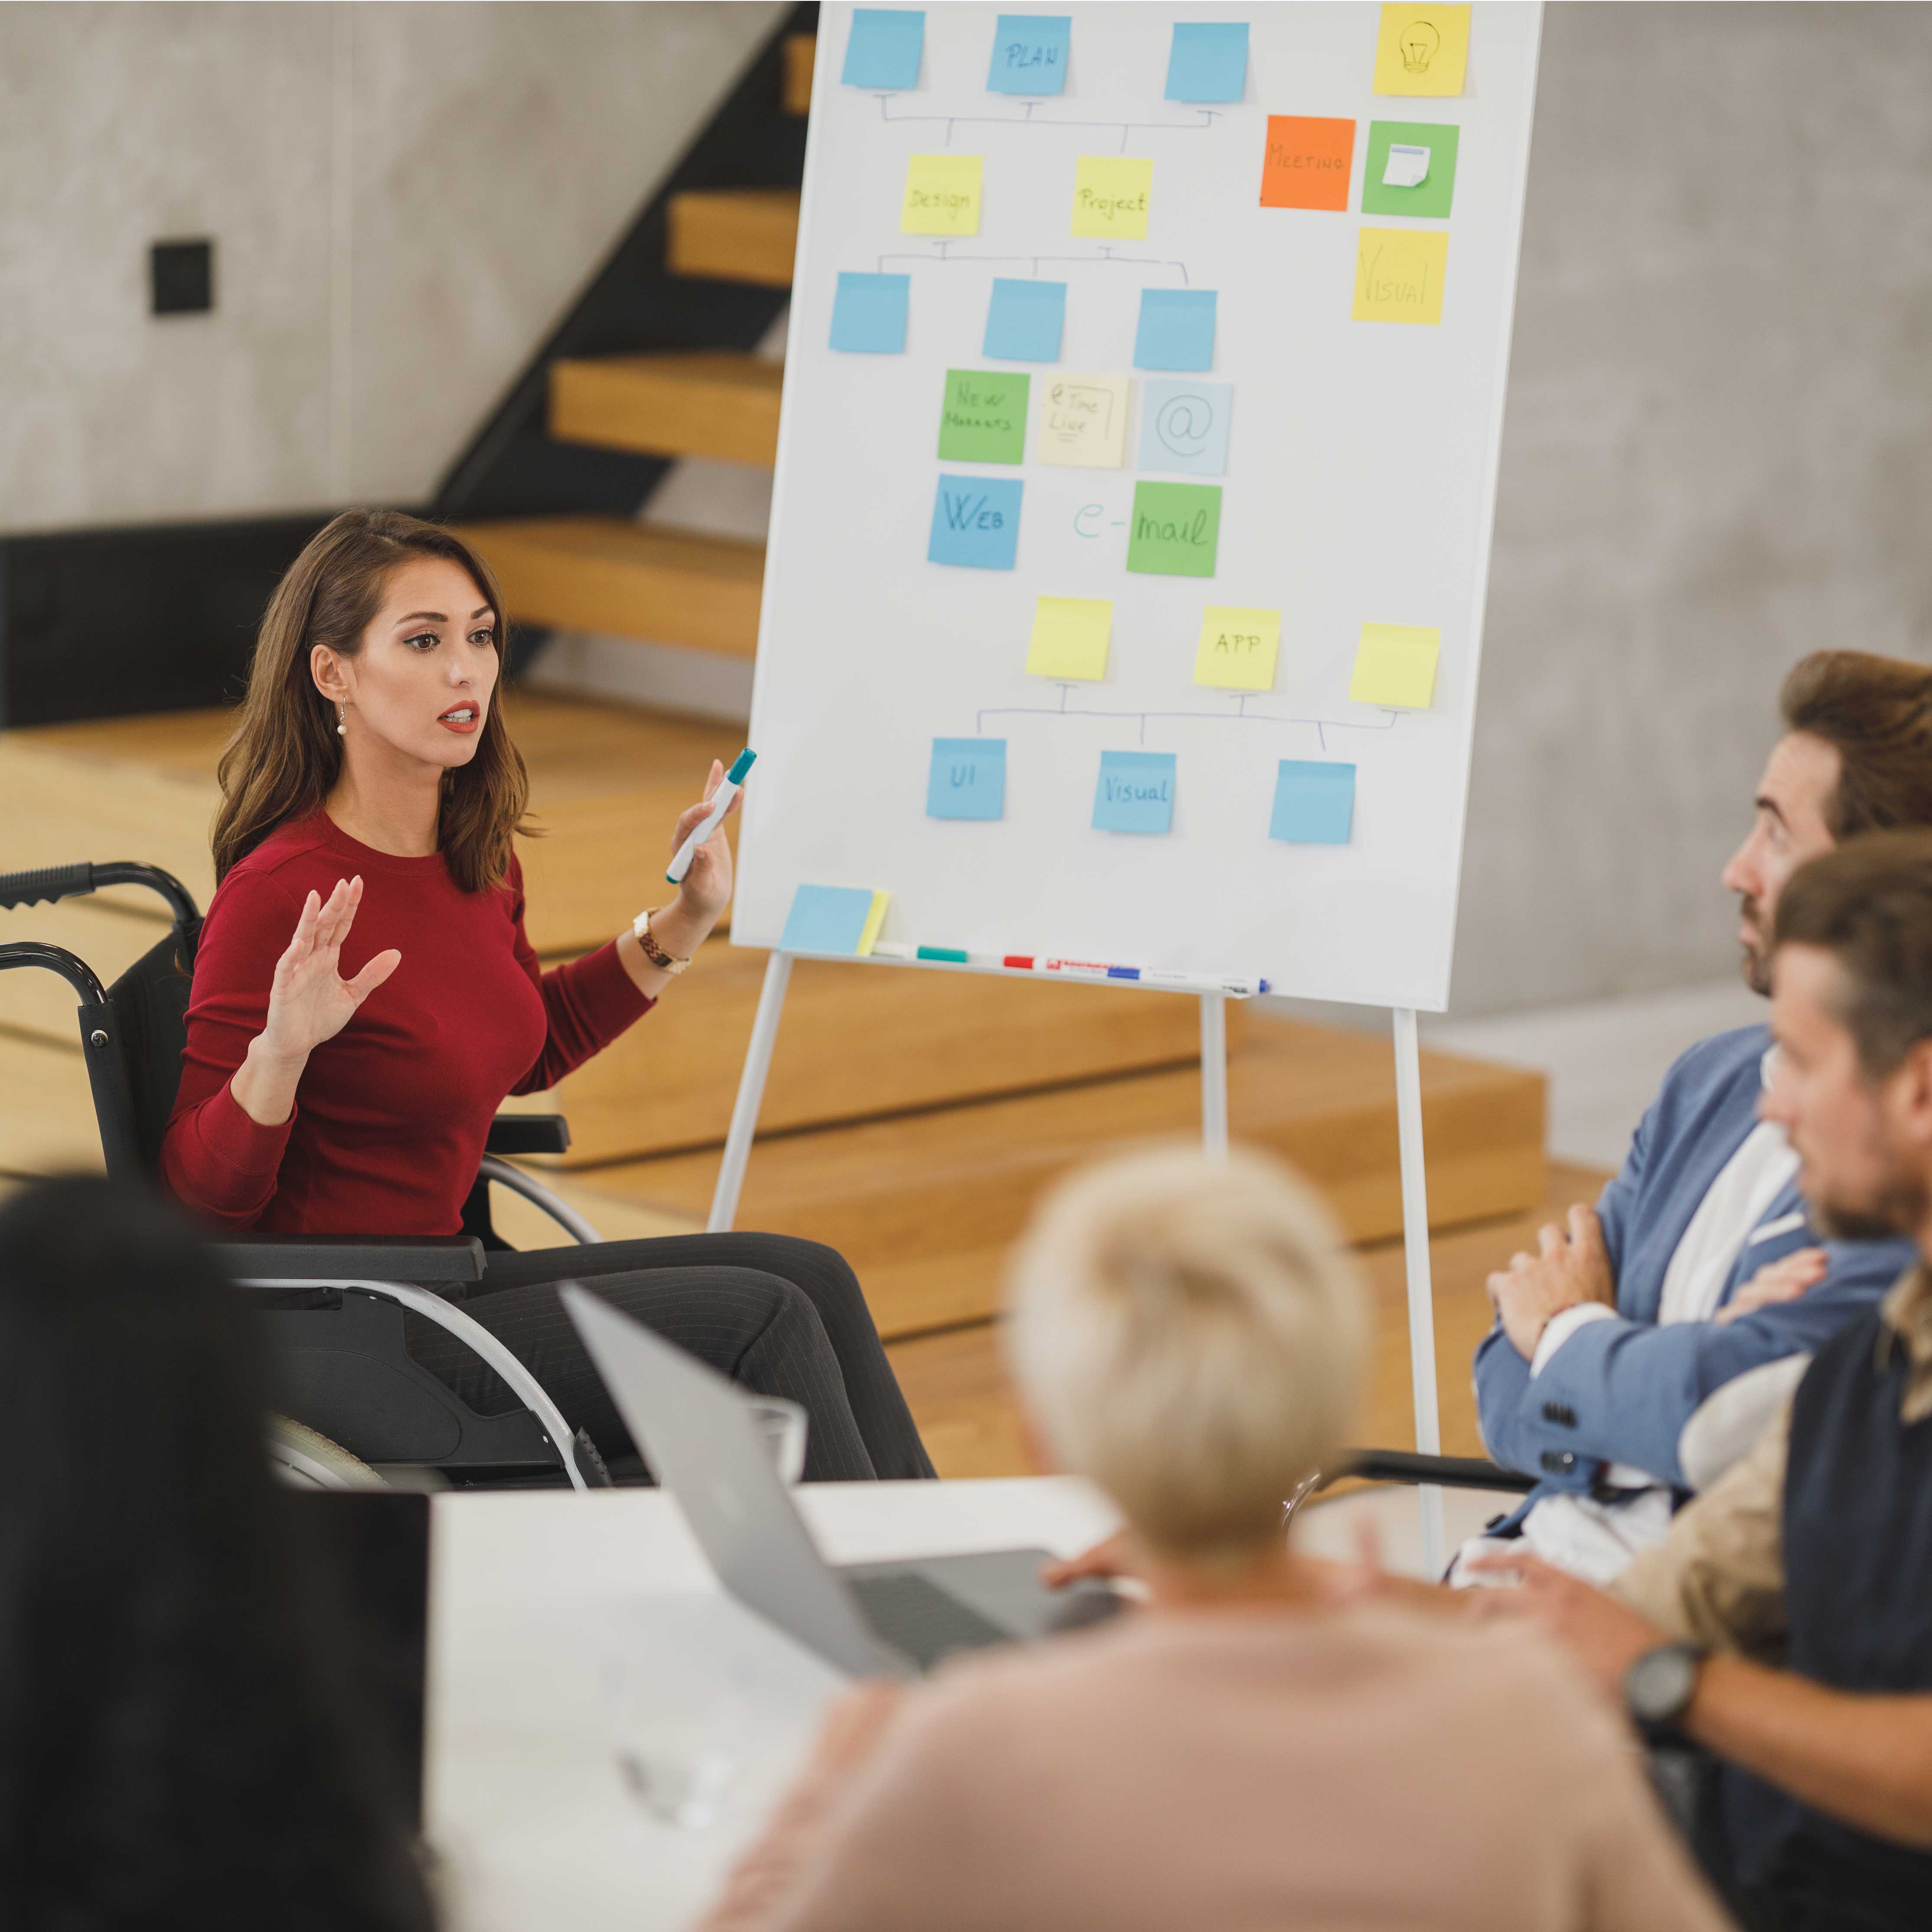 A group of people sit around a conference room table. They are looking at a woman who sits in a wheelchair and is making a presentation in front of a portable whiteboard covered with different colored sticky notes